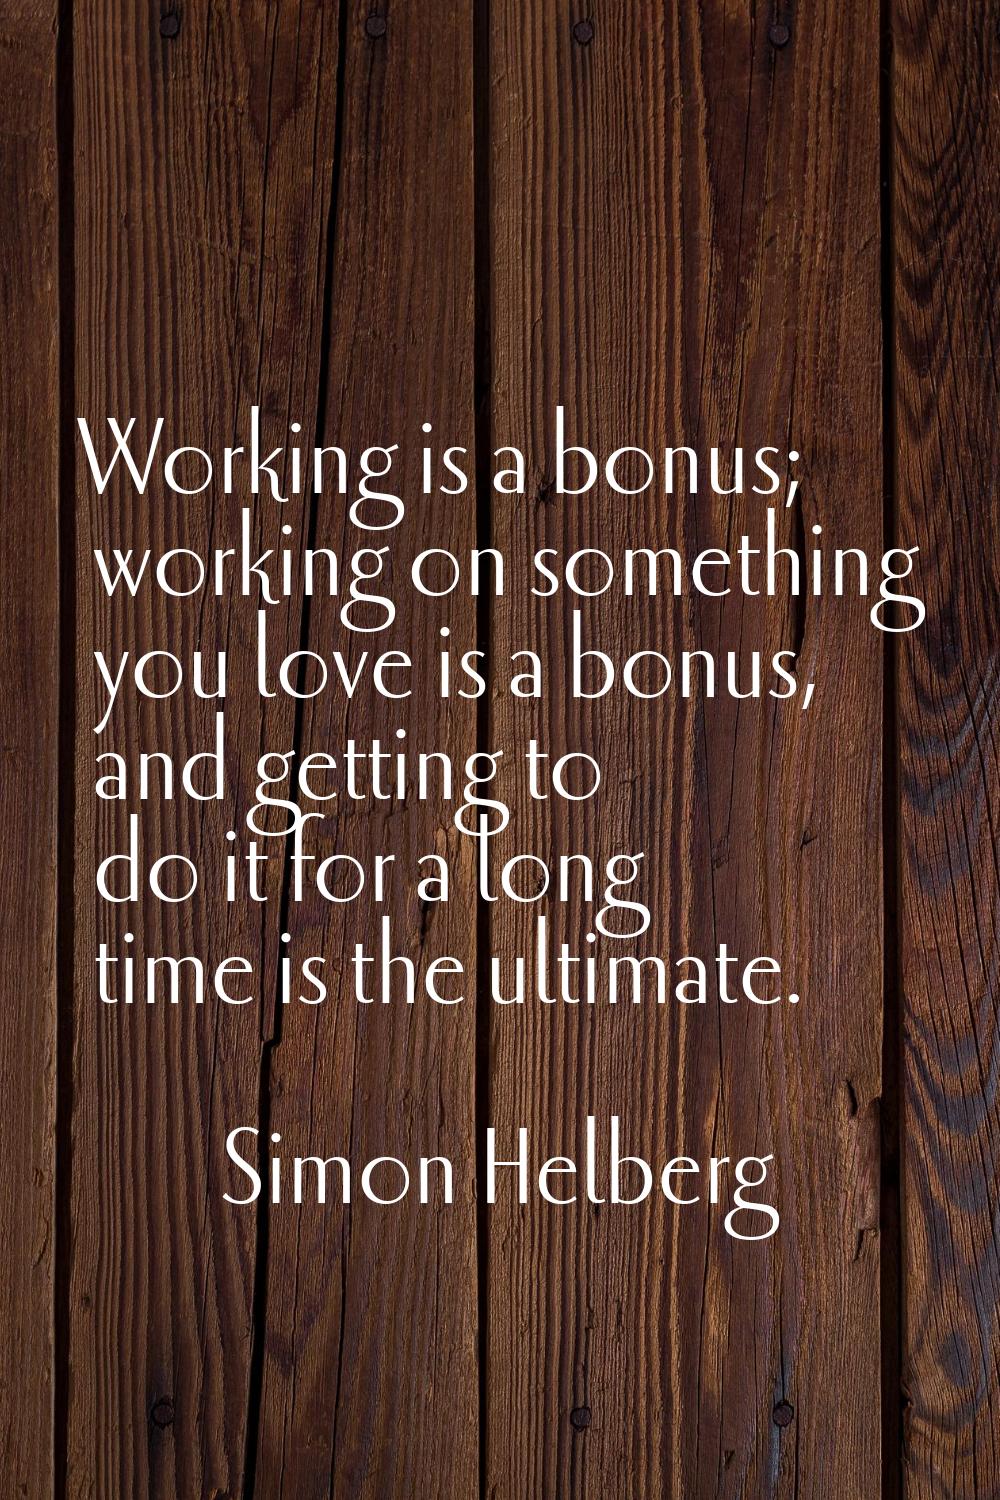 Working is a bonus; working on something you love is a bonus, and getting to do it for a long time 